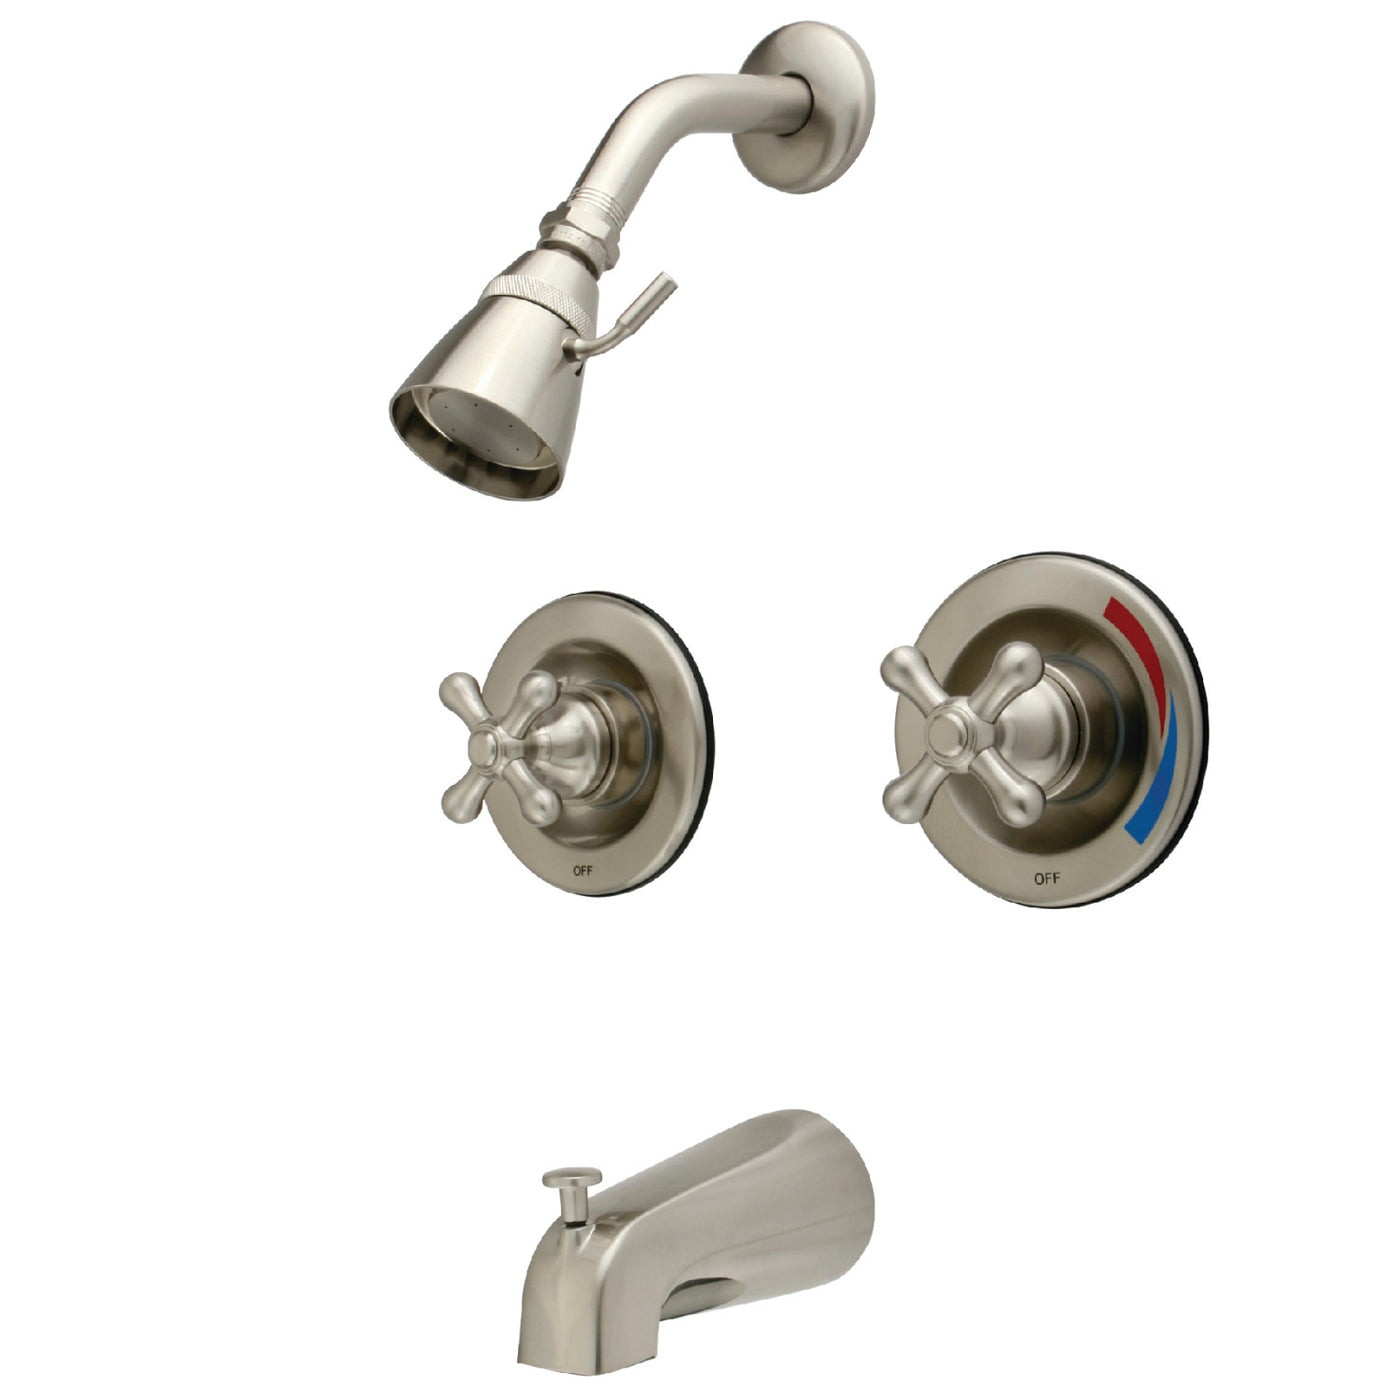 Elements of Design EB668AX Pressure Balanced Two-Handle Tub and Shower Faucet, Brushed Nickel